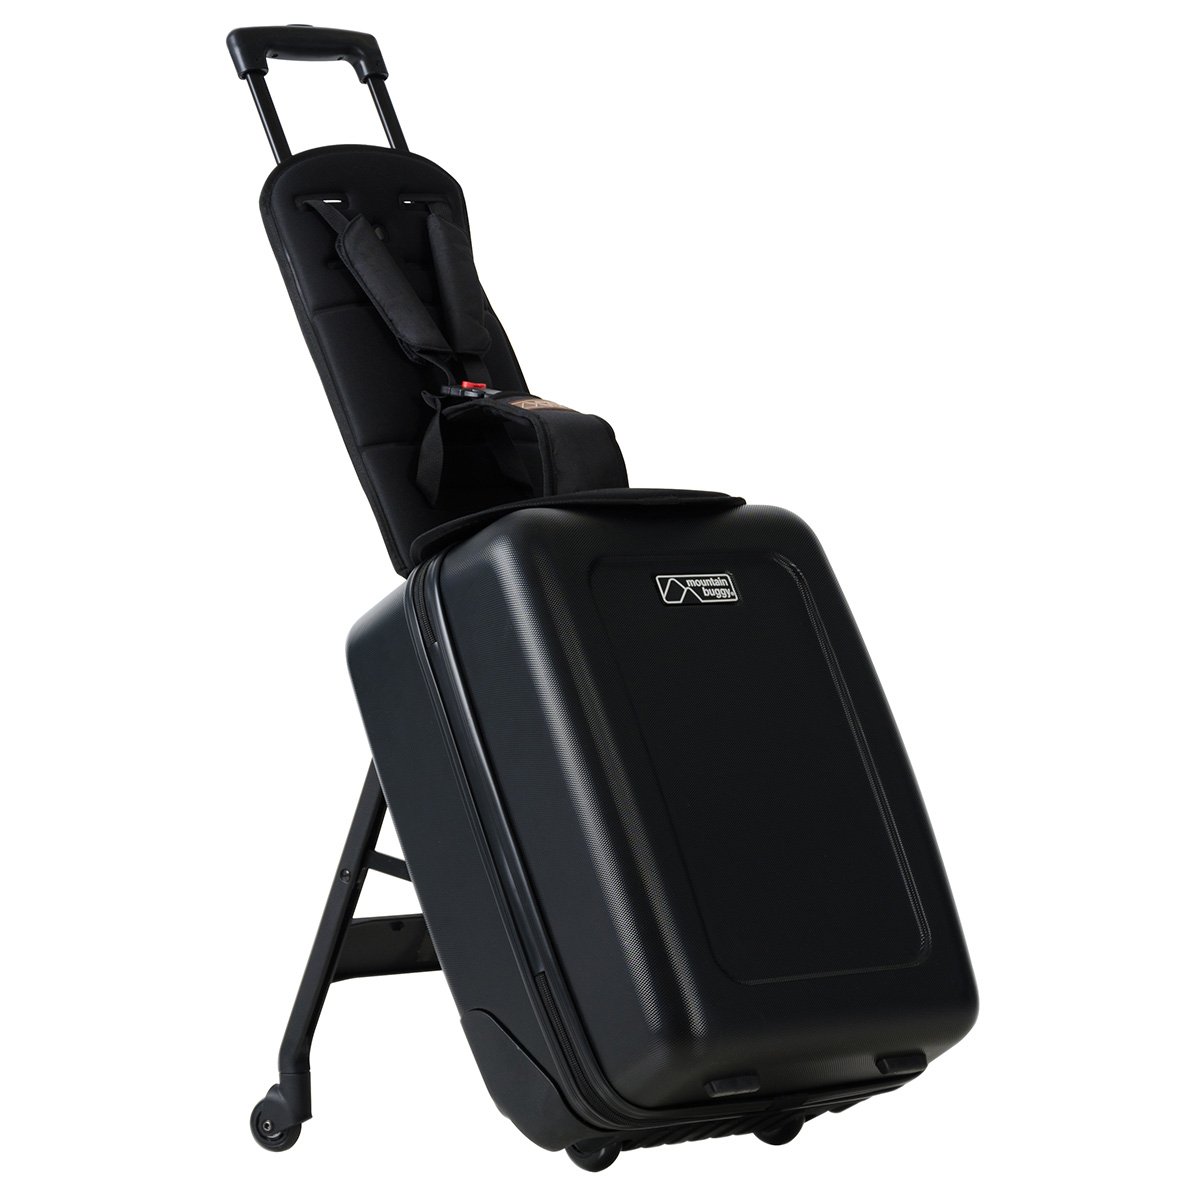 Mountain Buggy Bagrider – a pushchair suitcase